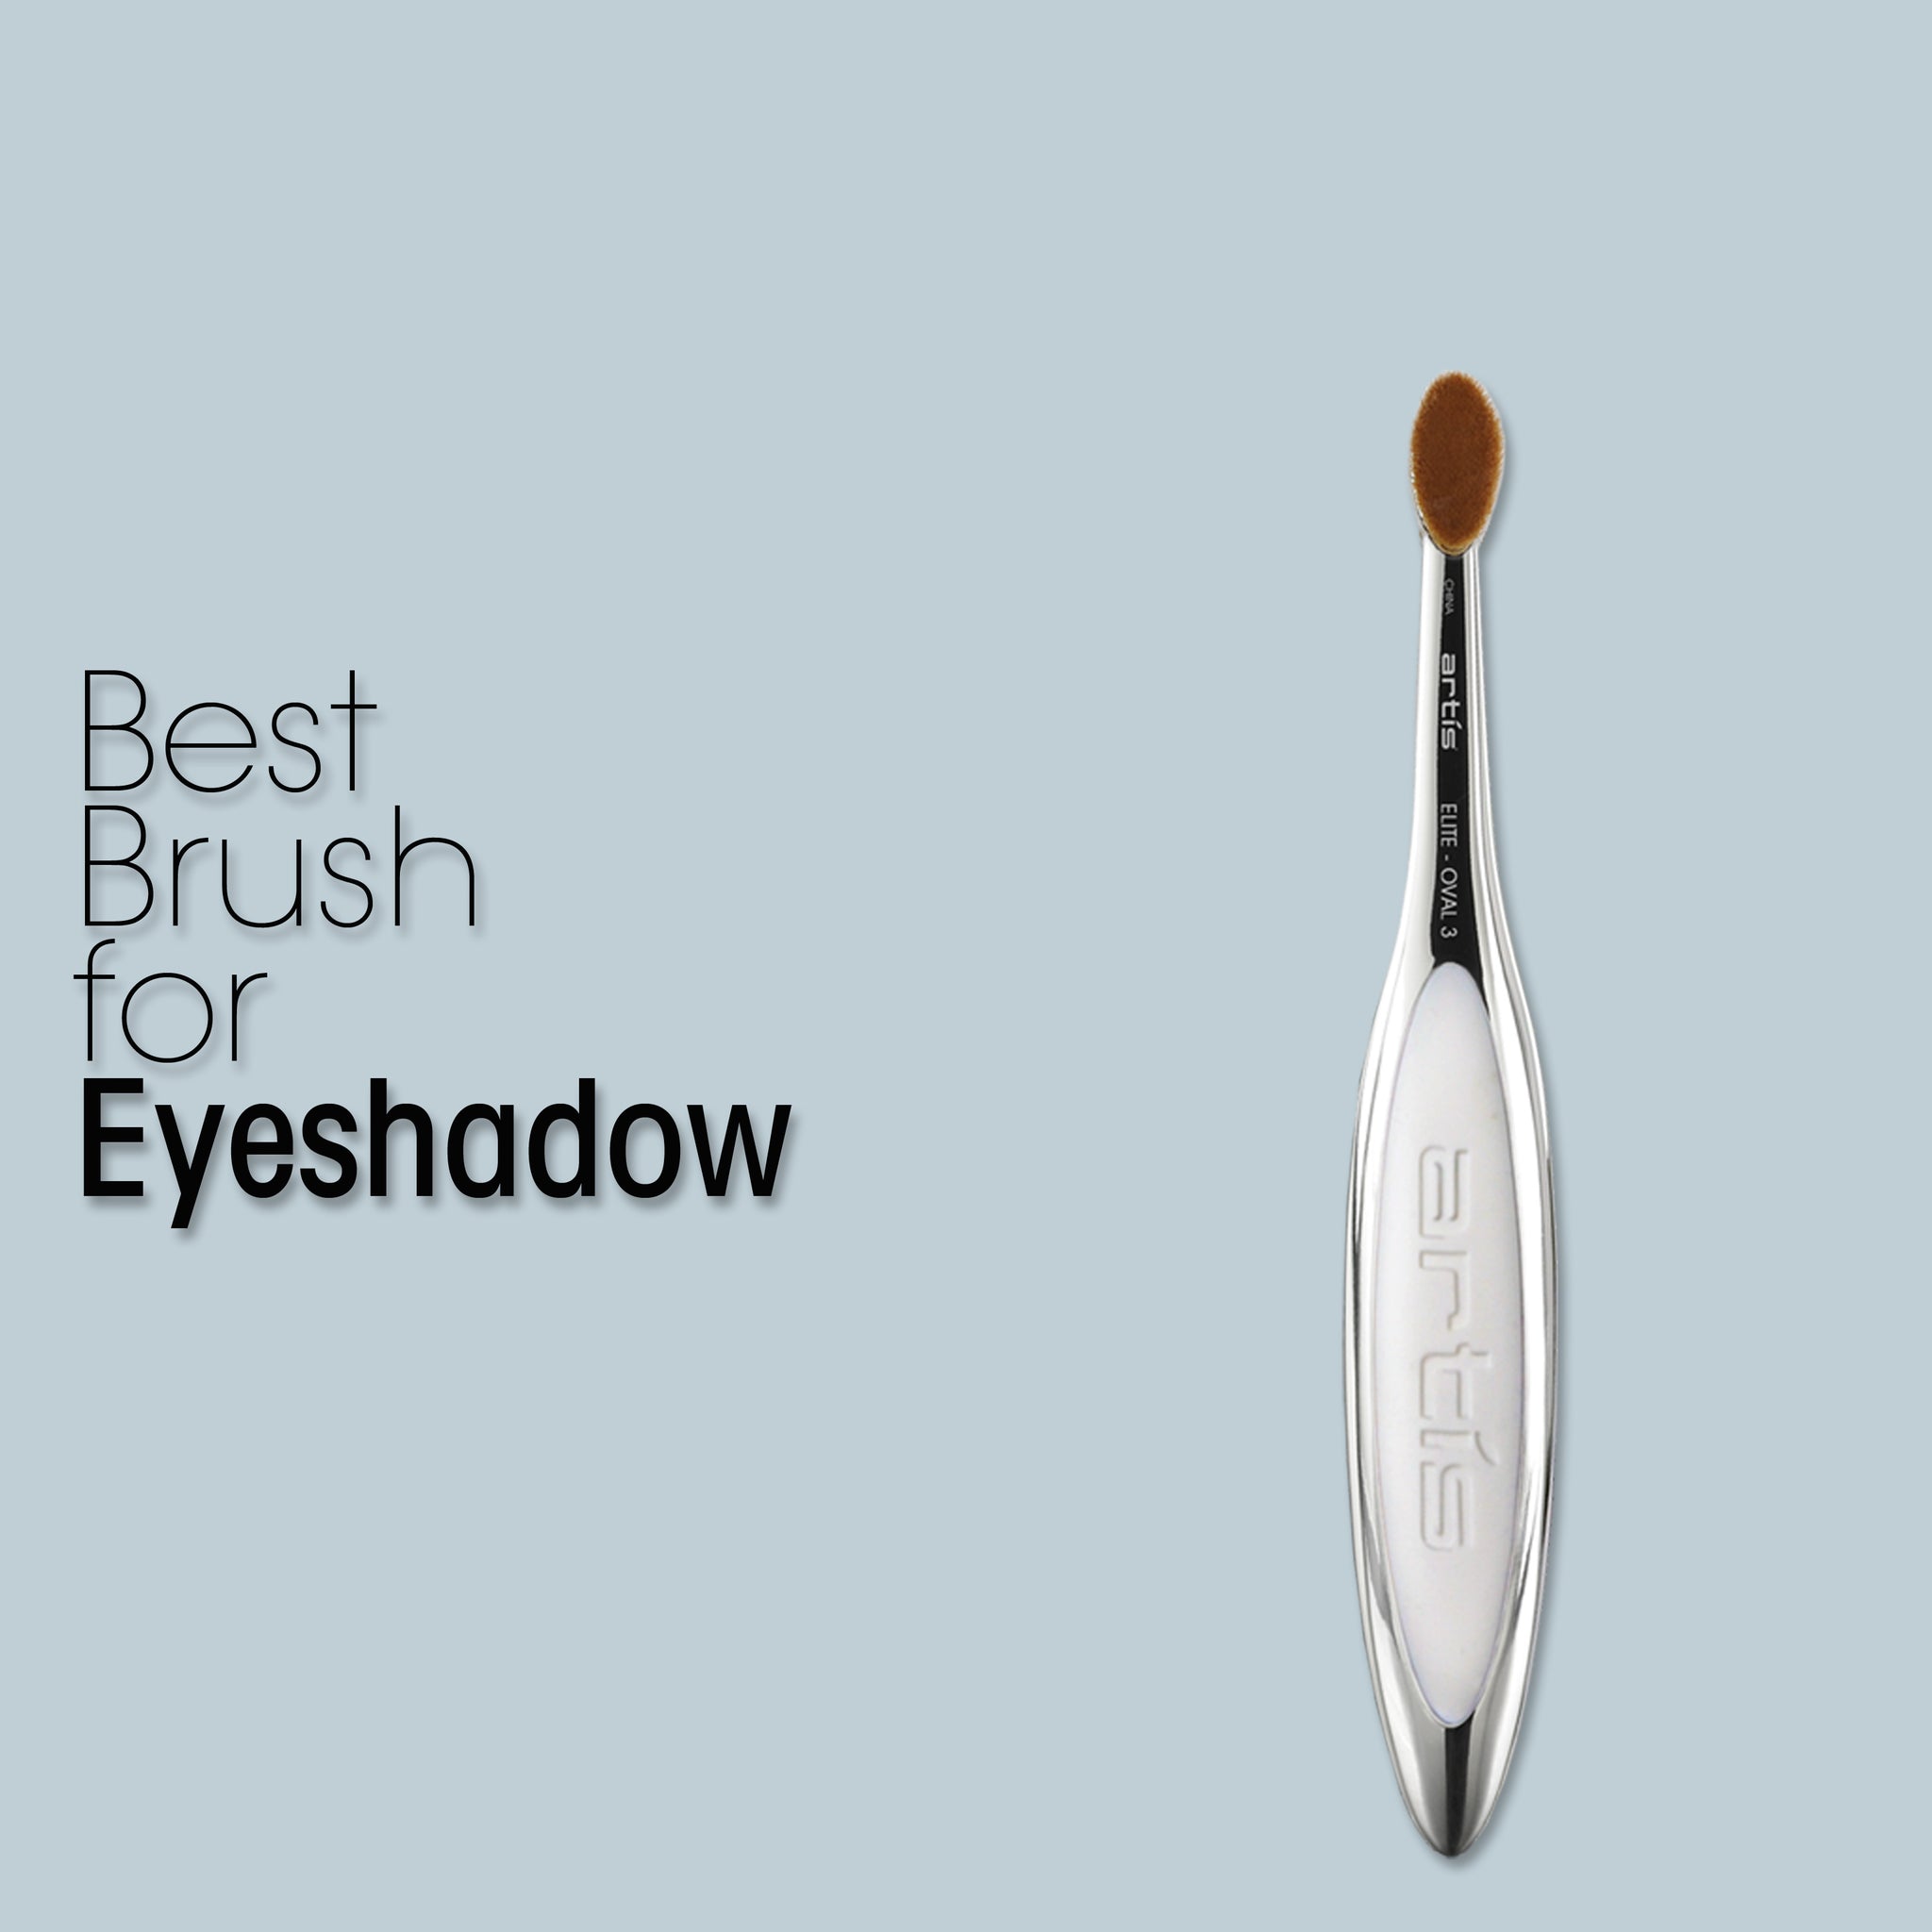 this image is the elite oval 3 brush which is deemed the best brush for eyeshadow use.